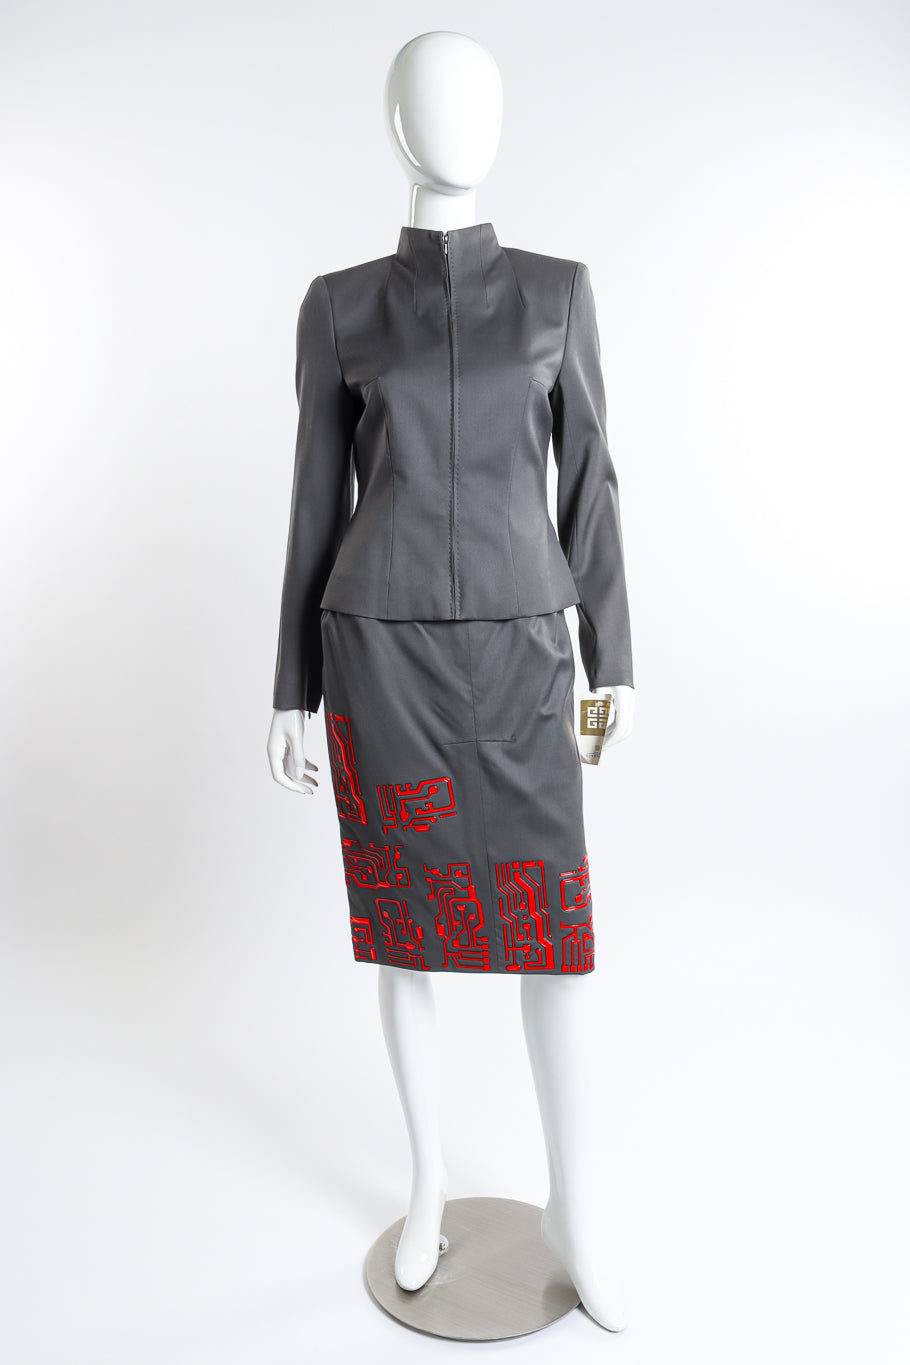 Vintage Givenchy 1999 F/W Circuit Board Zip Up Jacket & Skirt Set front on mannequin @recess la